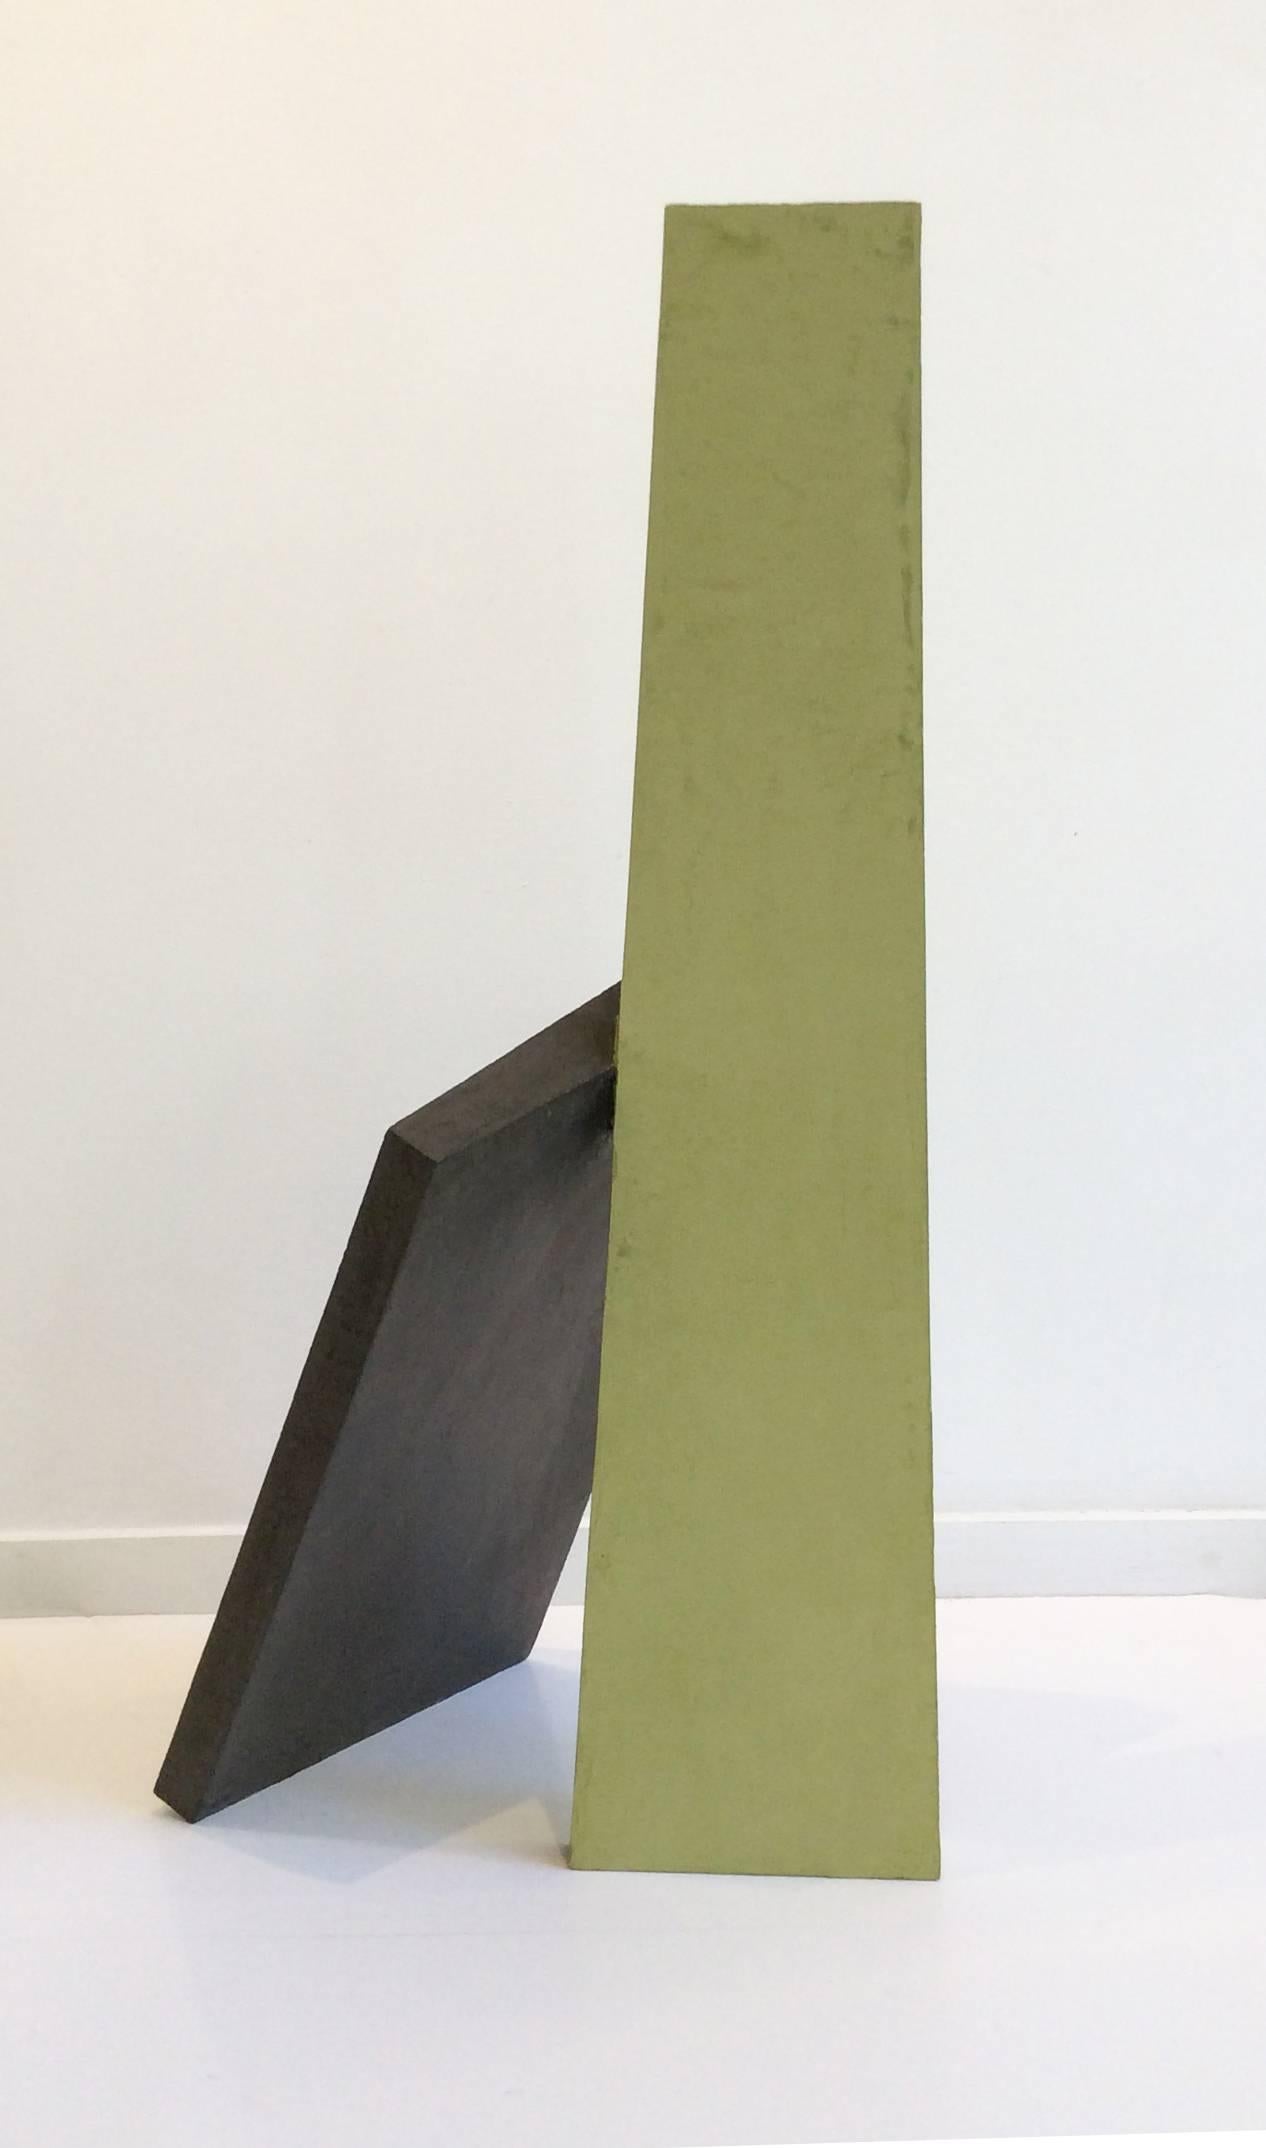 37 x 20 x 15
carved precision board, fiberglass, acrylic & Venetian plaster 

This contemporary, abstract minimalist free-standing sculpture was made by Japanese artist, Dai Ban in 2015. The elegant minimalist sculpture is incredibly lightweight and